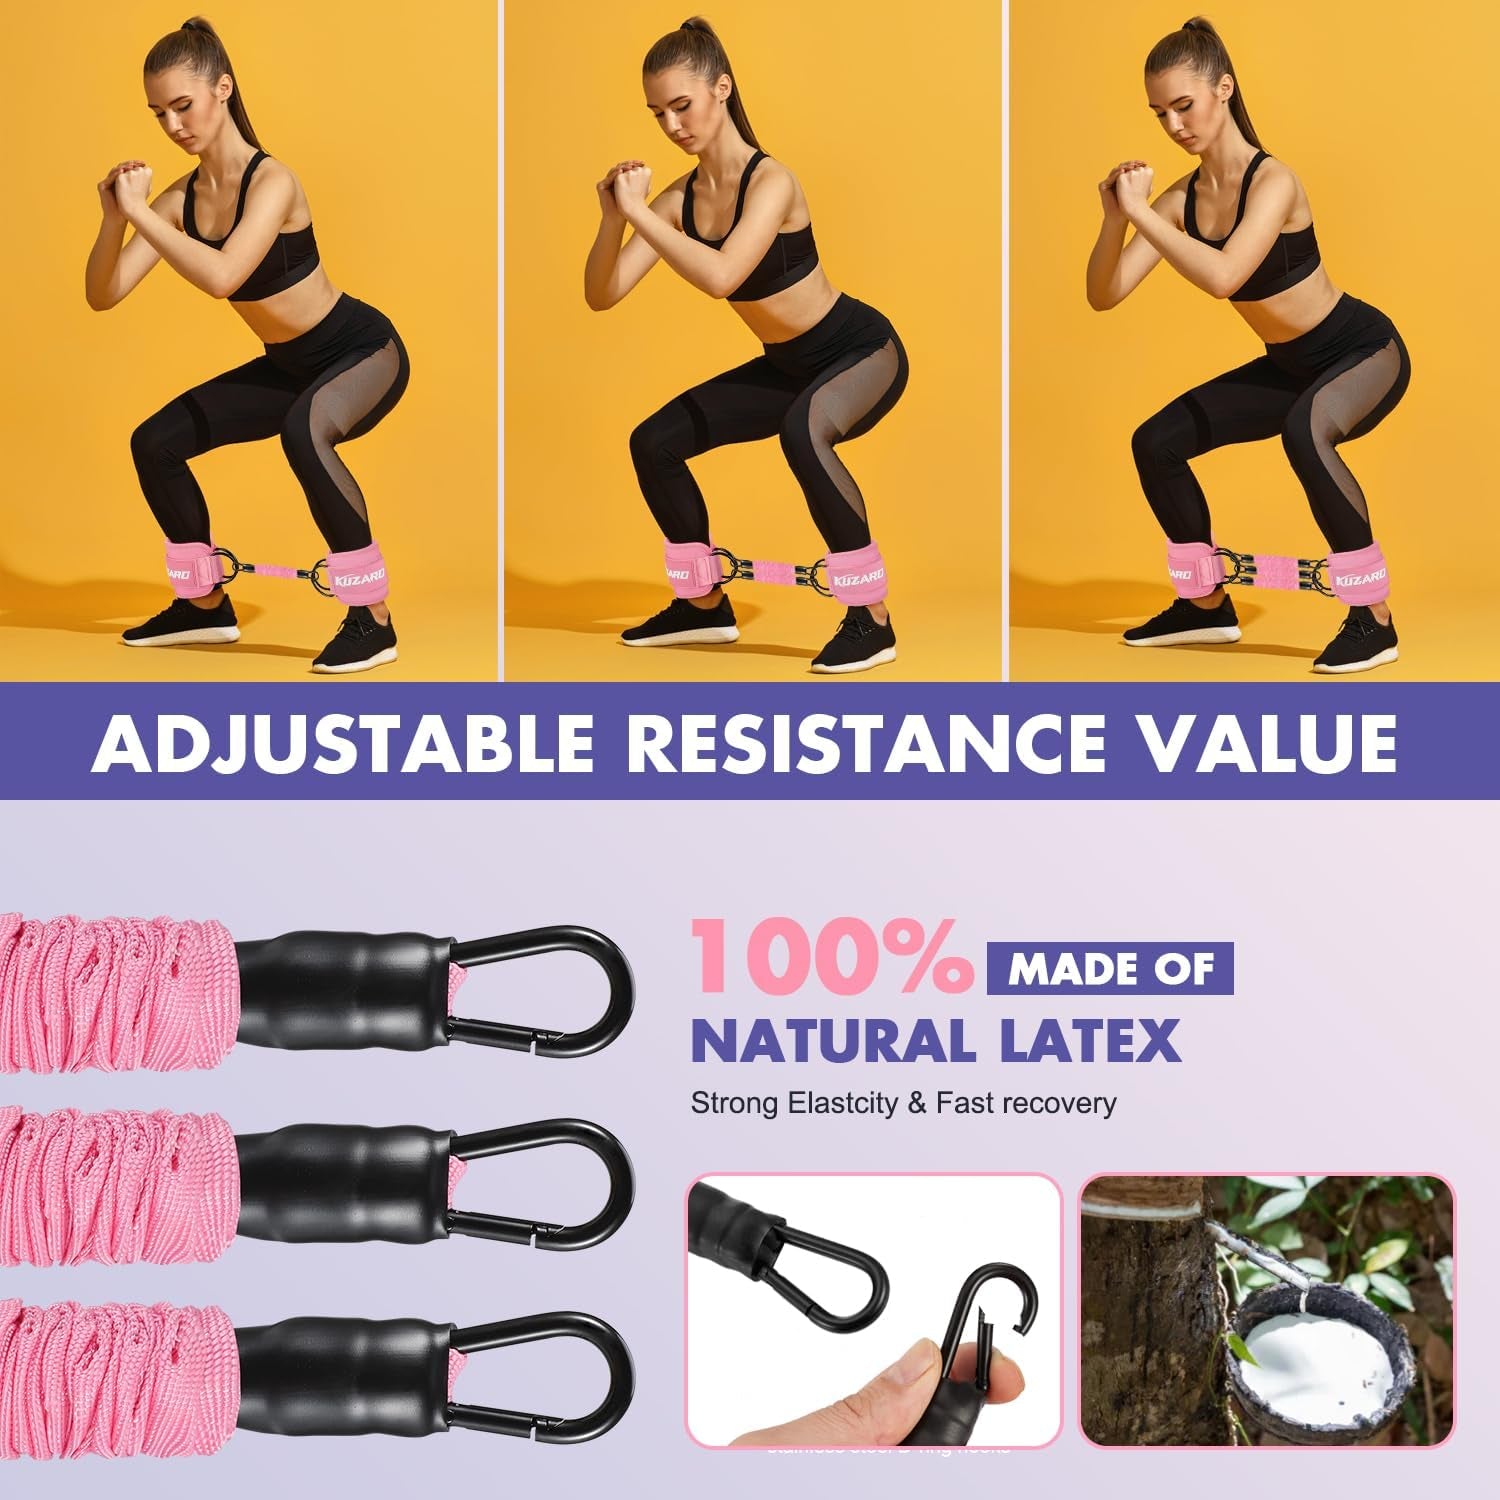 Ankle Resistance Bands with Cuffs, Ankle Bands for Working Out, Ankle Resistance Band, Glutes Workout Equipment, Butt Exercise Fitness Equipment for Women and Booty - Perfect for Home Gym Workout